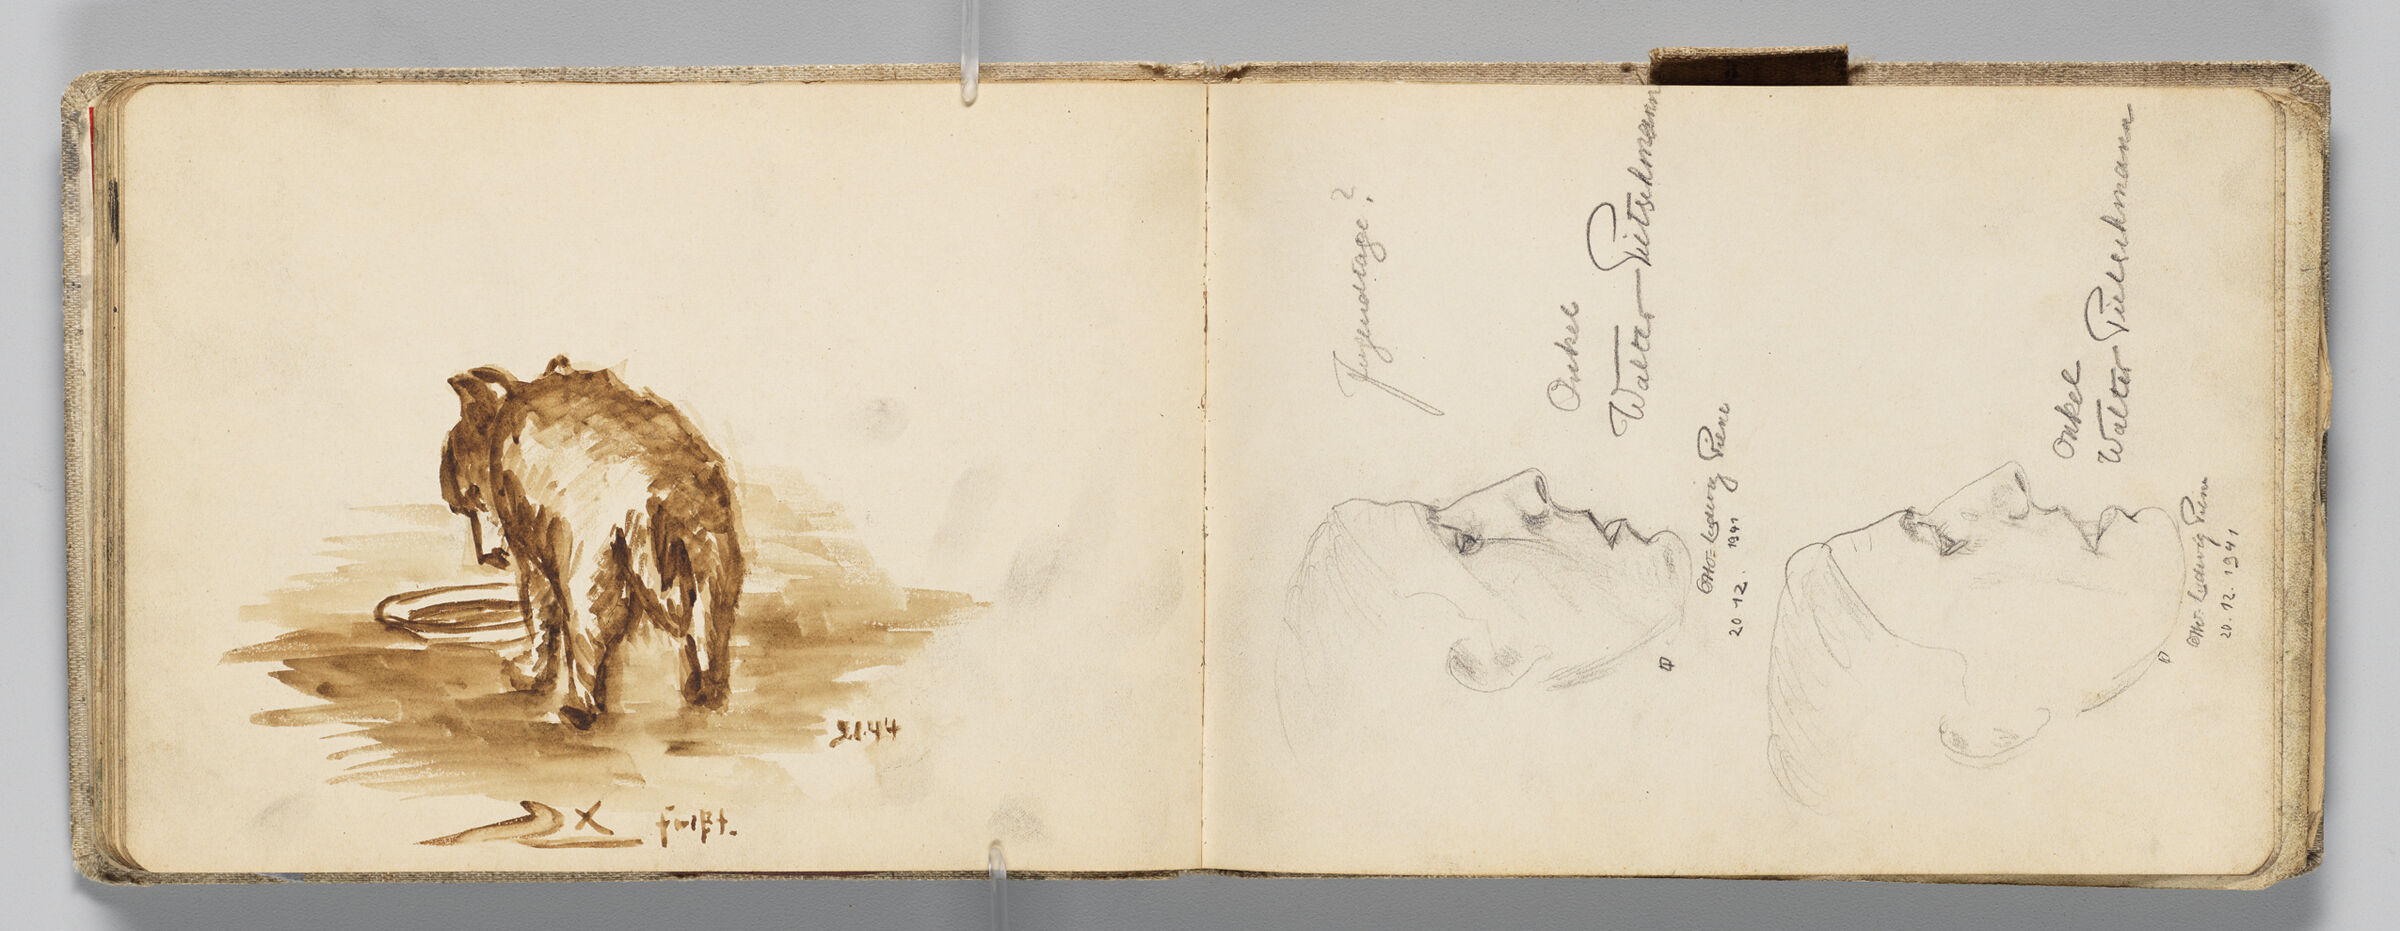 Untitled (Animal Eating, Left Page); Untitled (Sketches Of Artist's Uncle [Walter Pietschmann], Right Page)